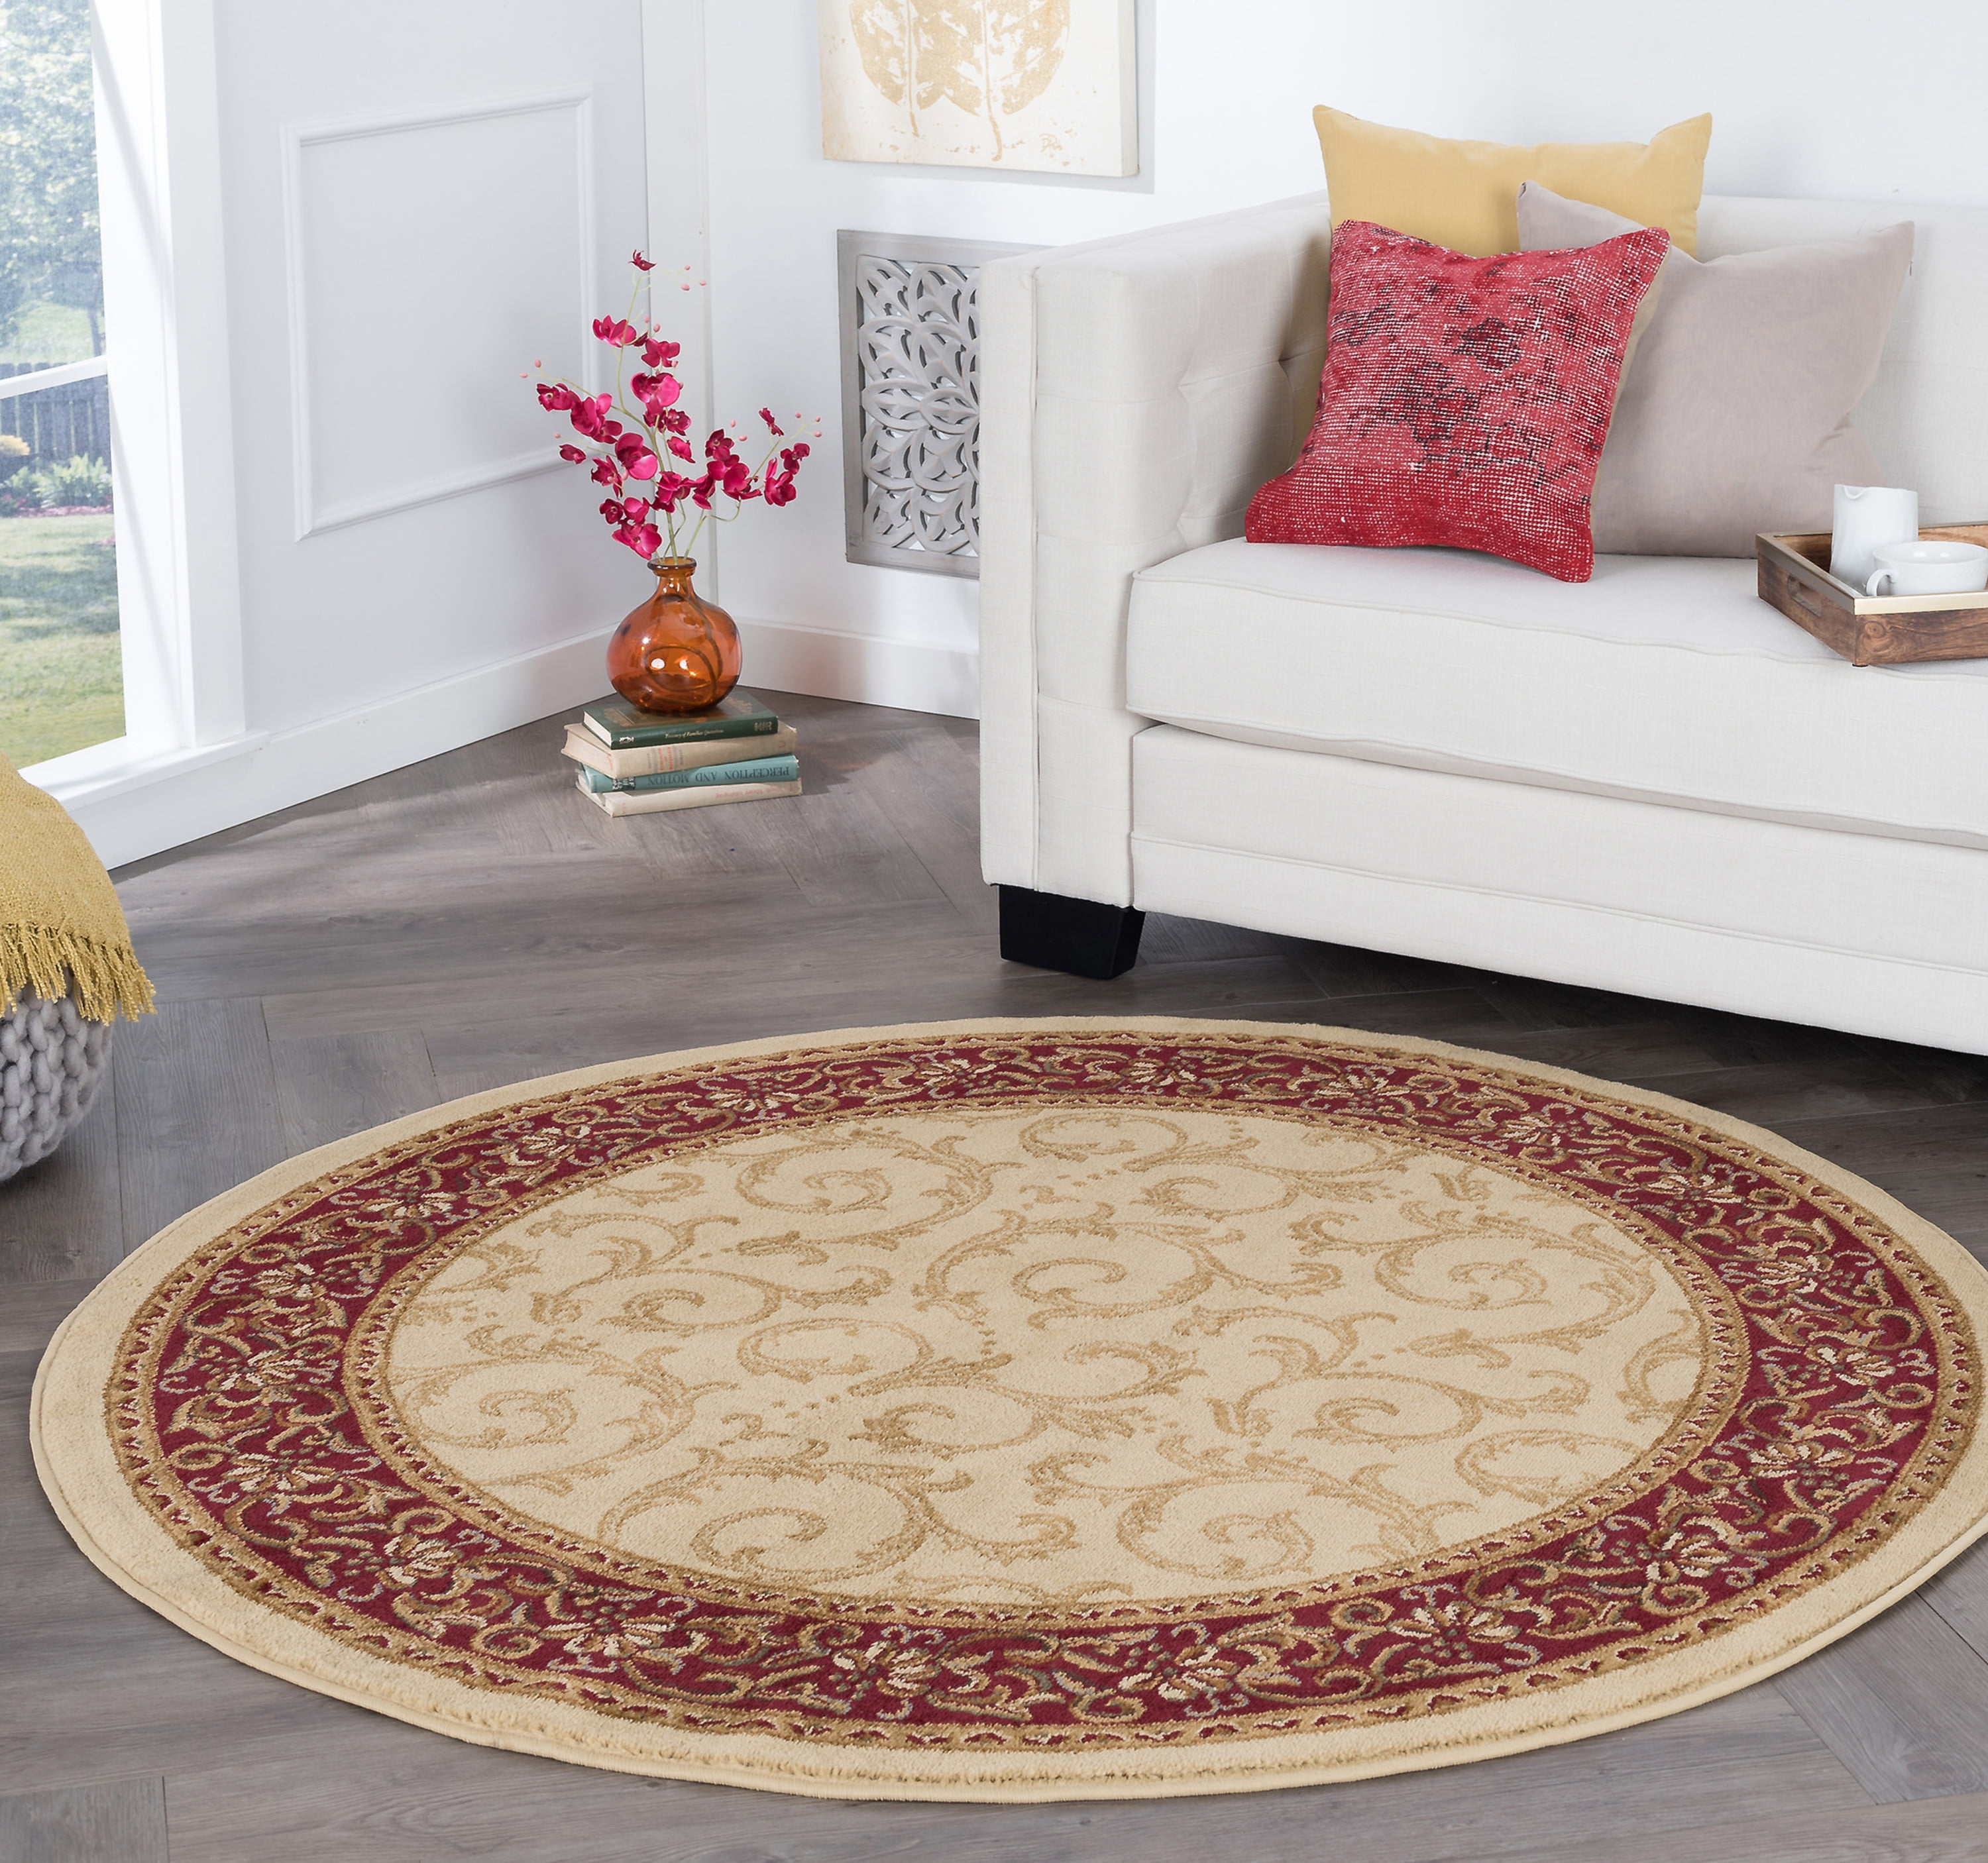 6ft Round Transitional Black Round Area Rugs for Living Room, Bedroom Rug, Dining Room Rug, Indoor Entry or Entryway Rug, Kitchen Rug